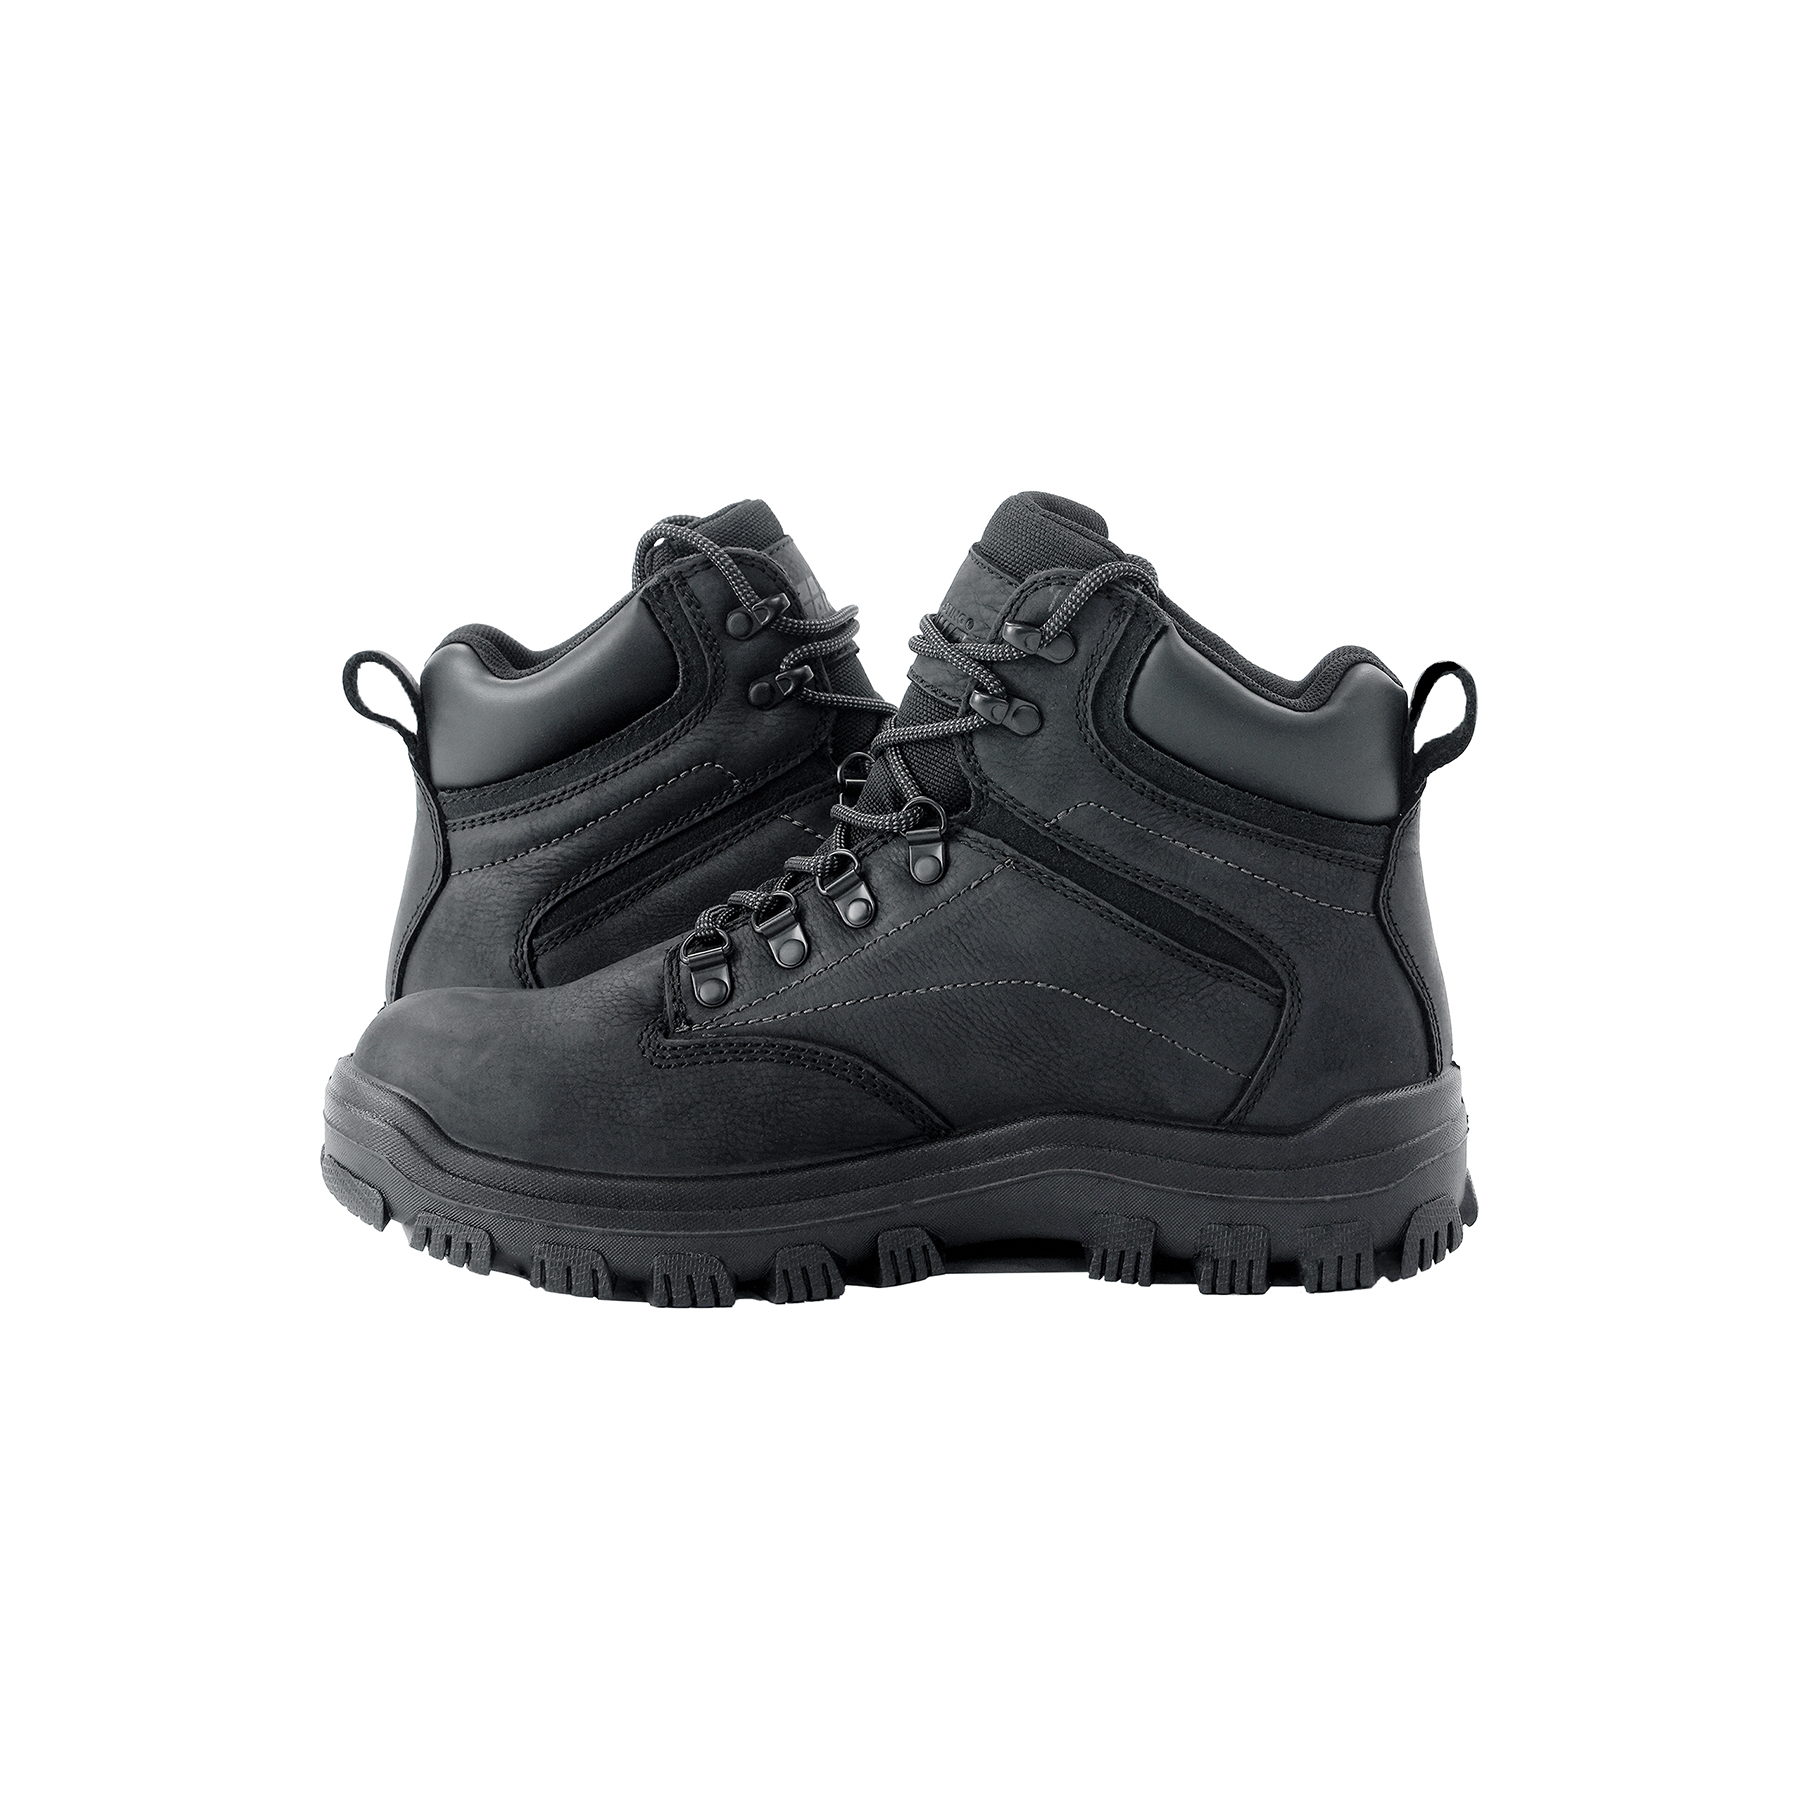 Whale Martin Shoes--Black, steel toe boots and safety shoes. ASTM.